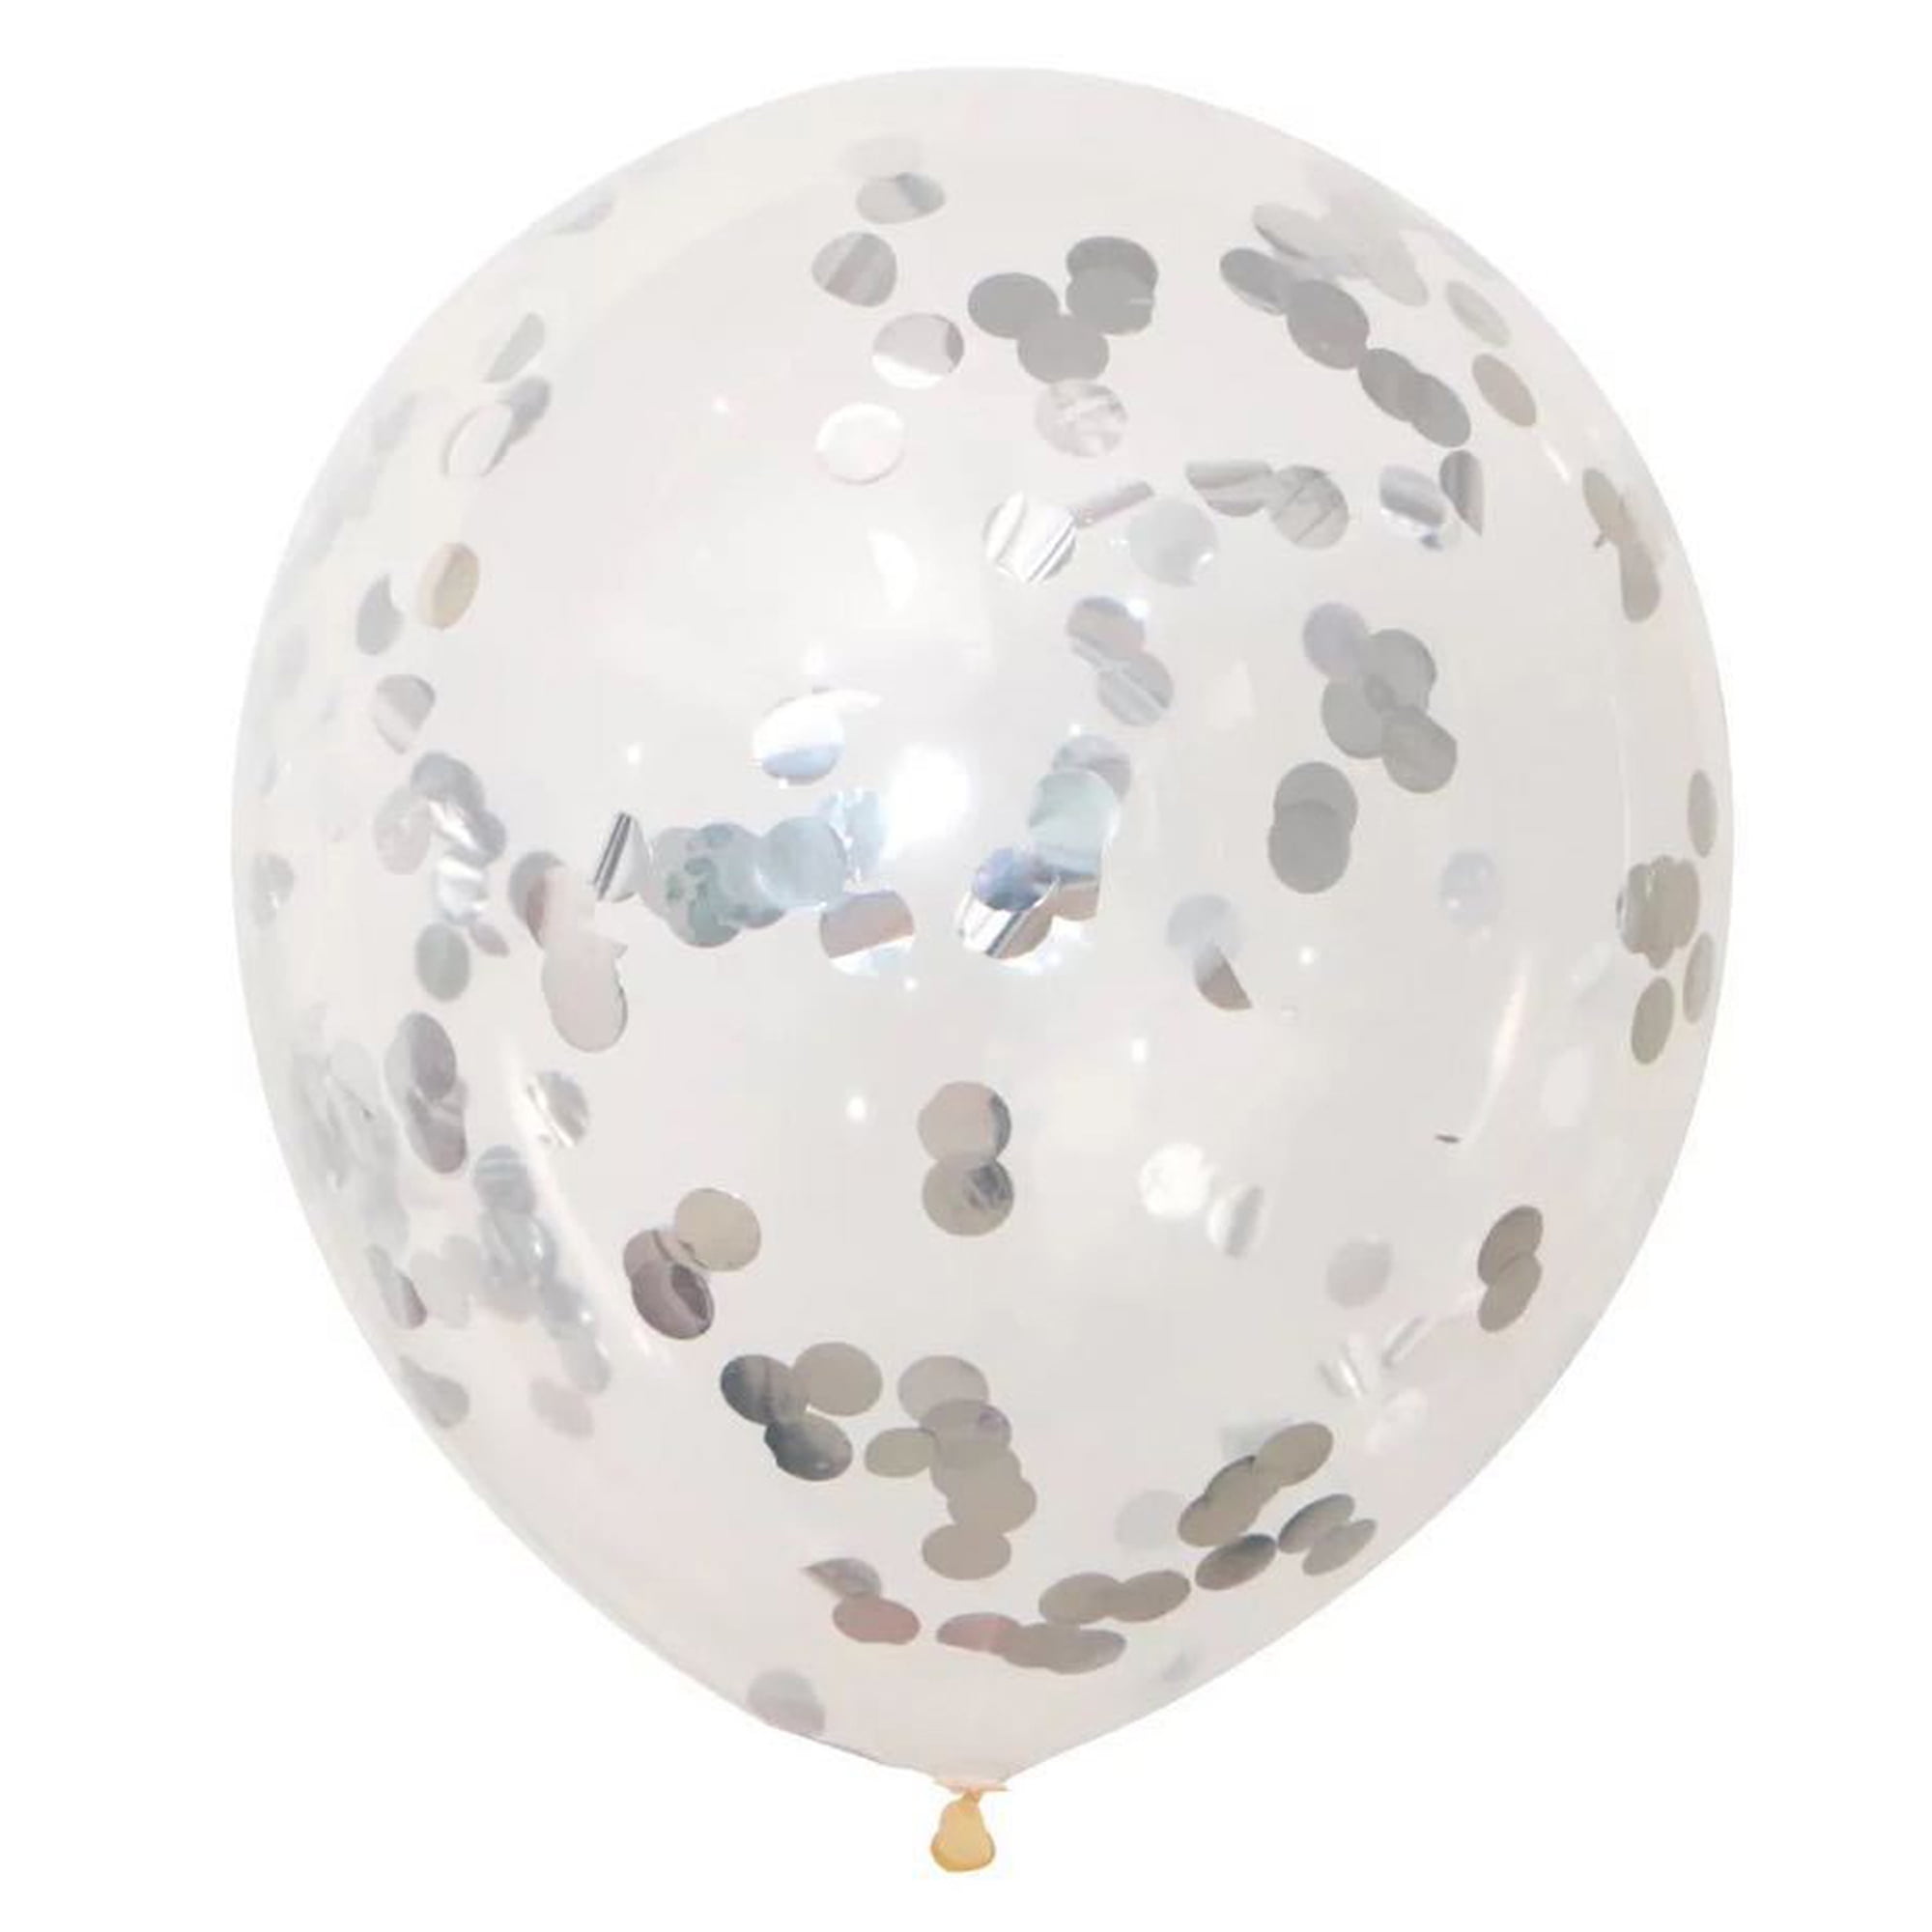 Details about   CONFETTI FILLED BALLOONS 12" FOAM Large Helium Quality Party Wedding Decorations 